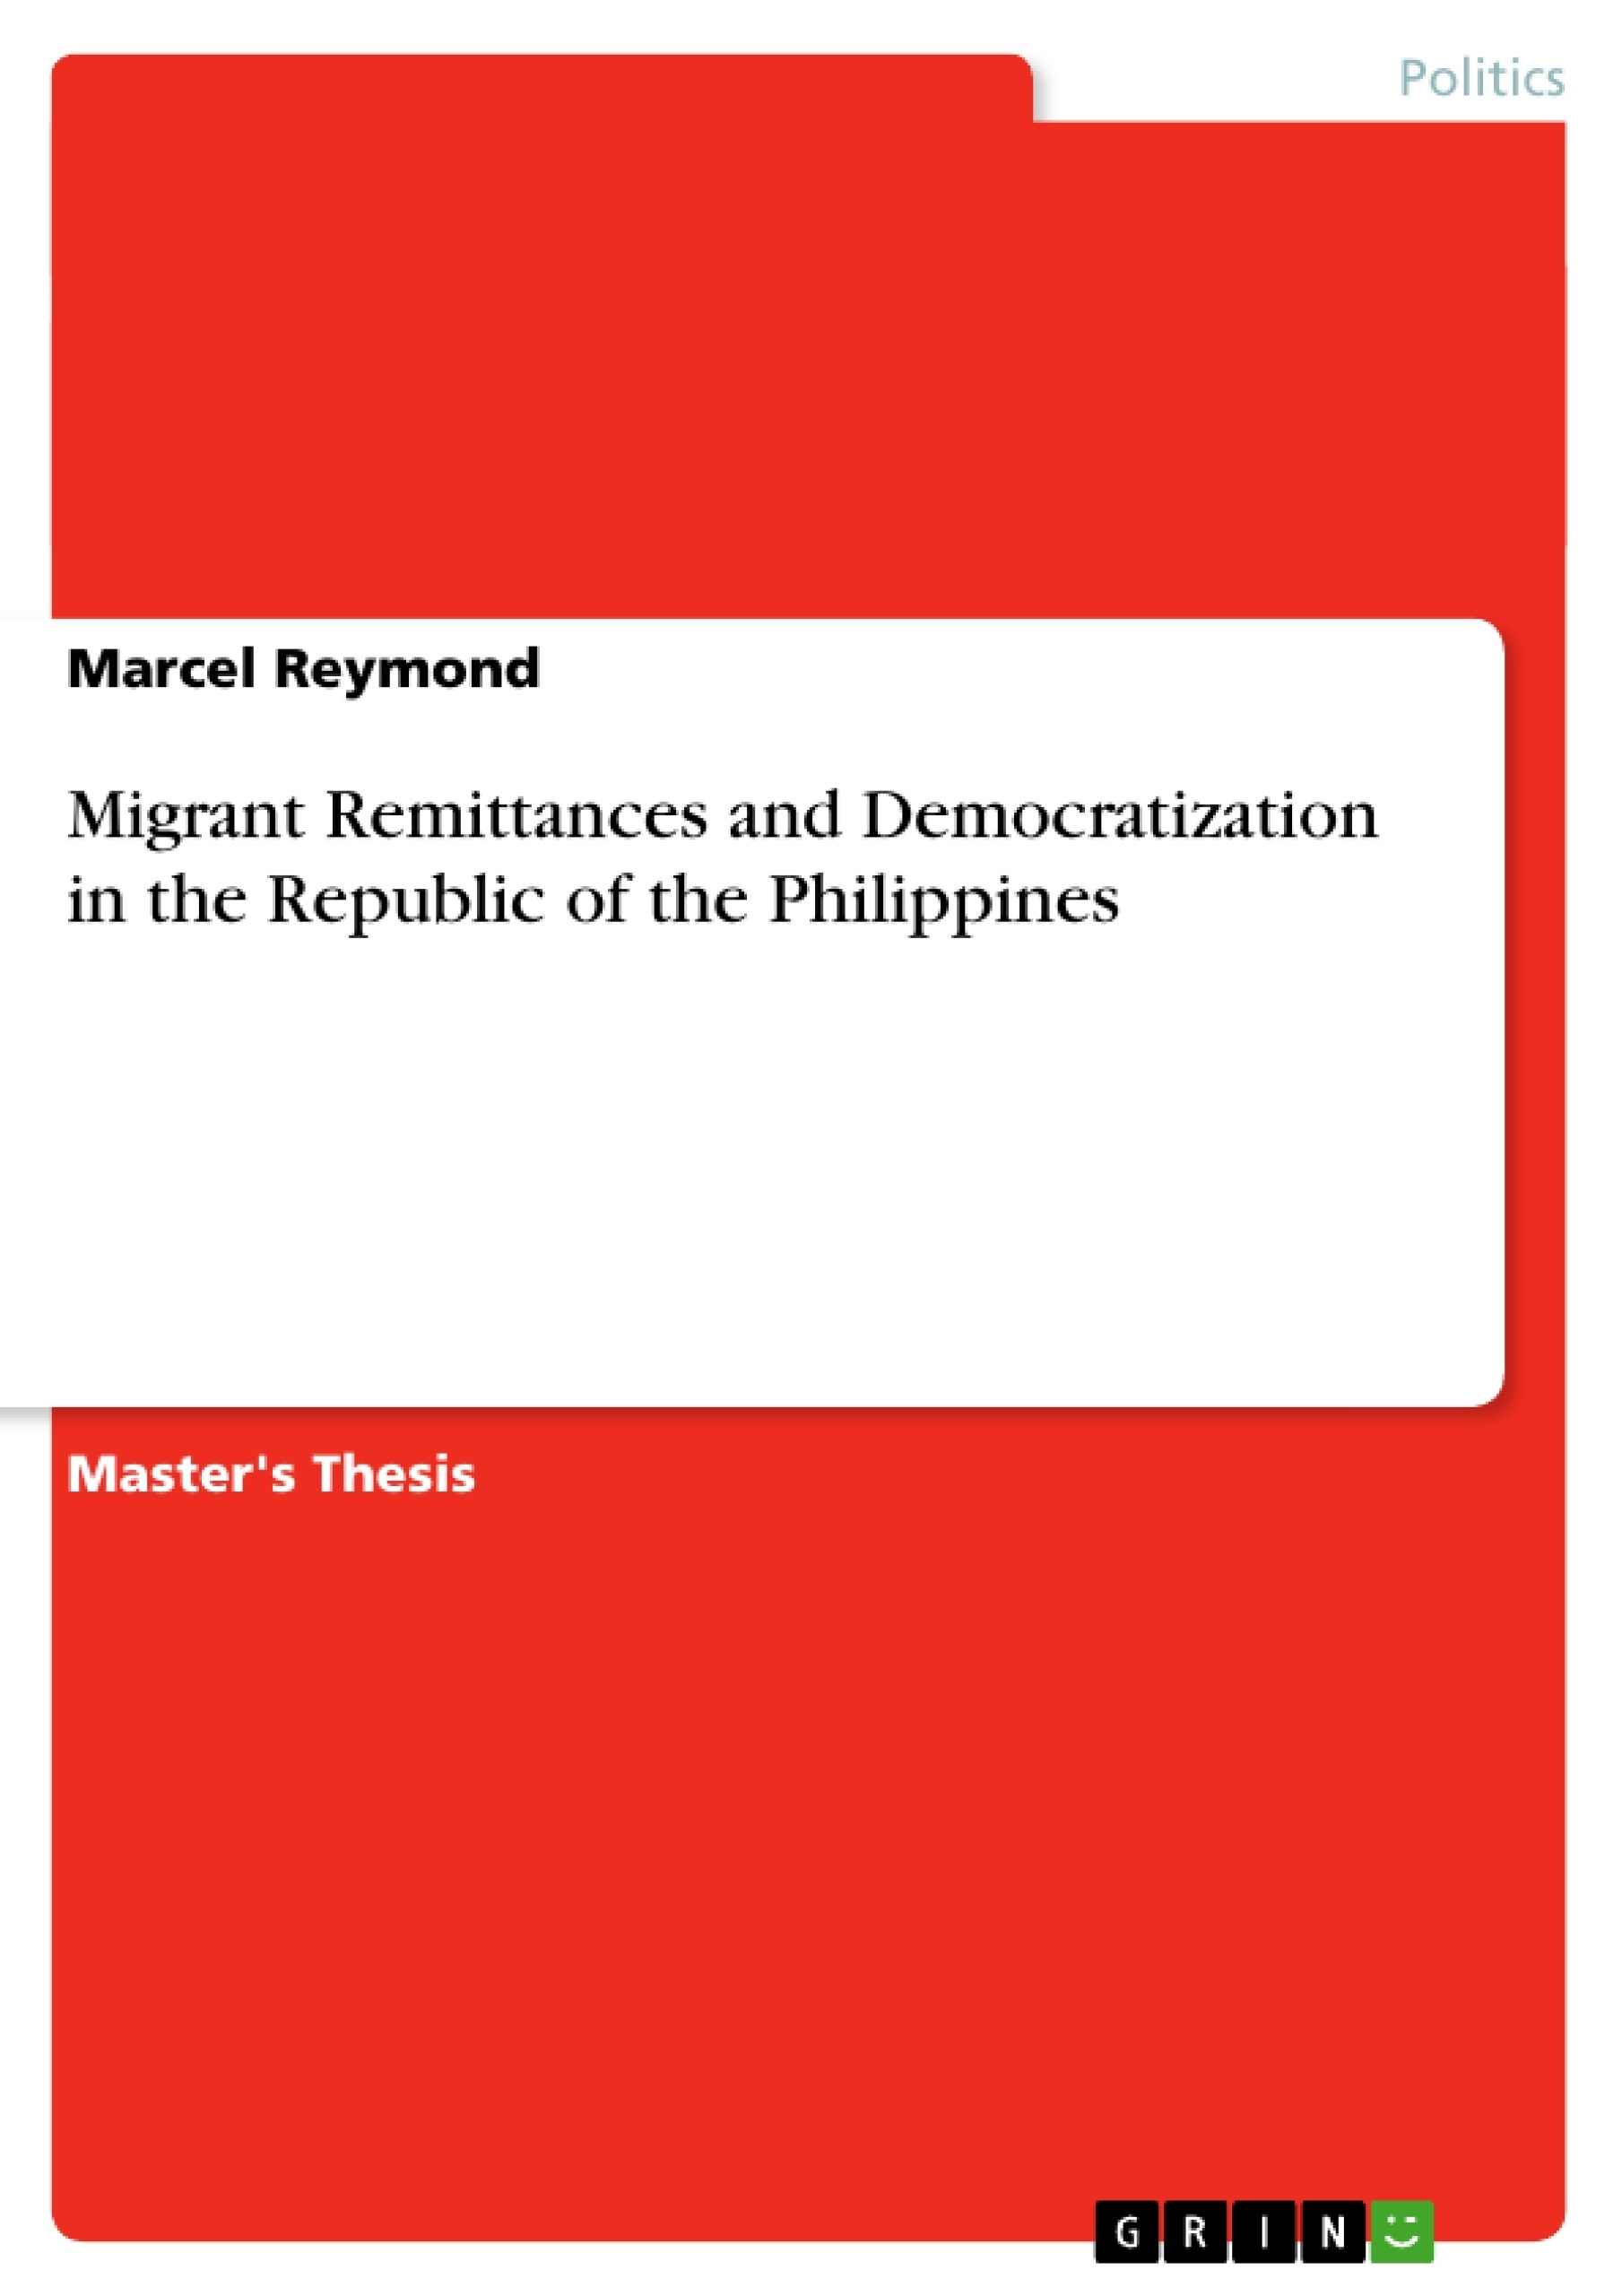 Title: Migrant Remittances and Democratization in the Republic of the Philippines